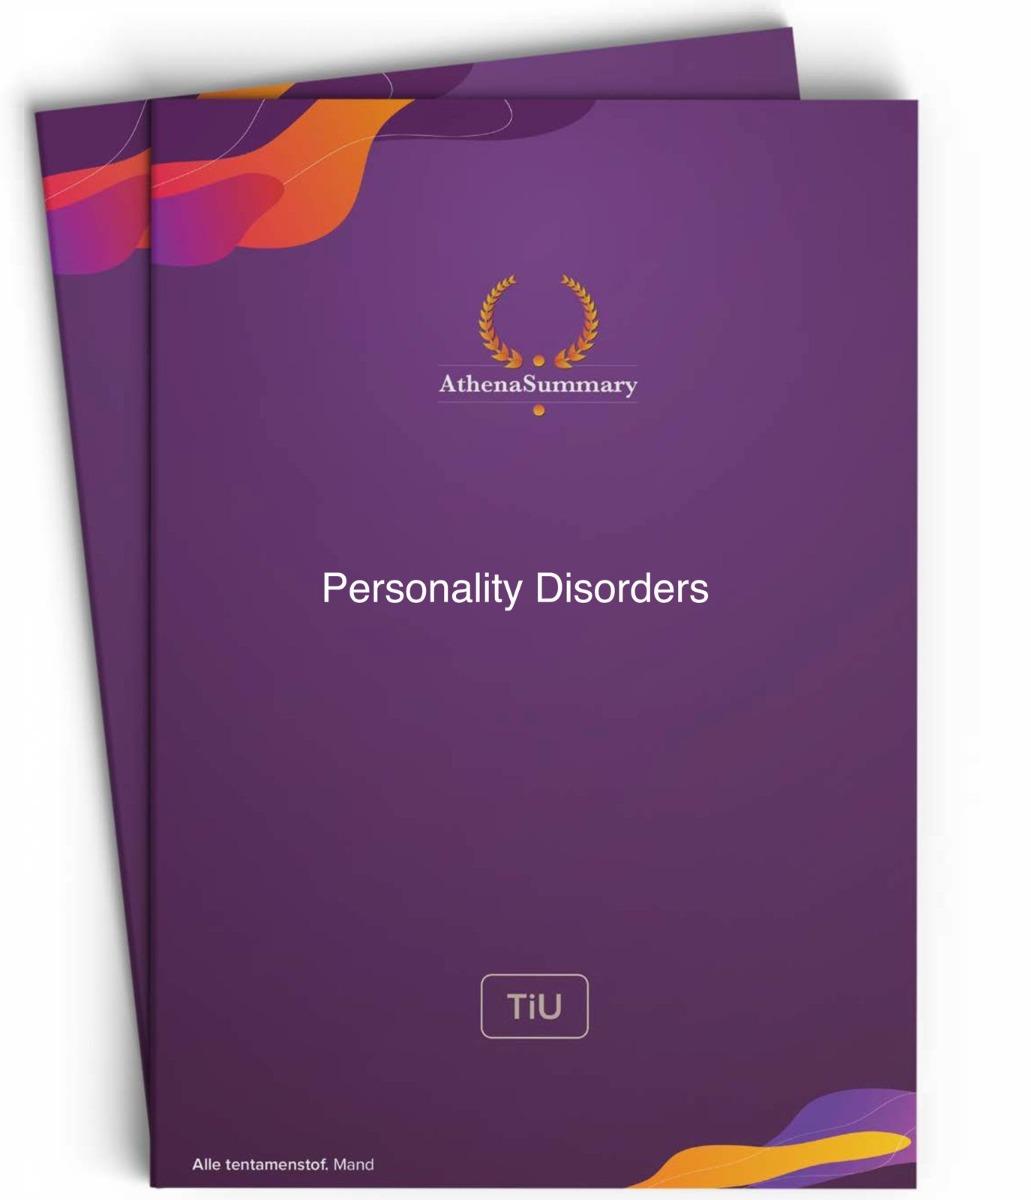 Literature Summary: Personality Disorders